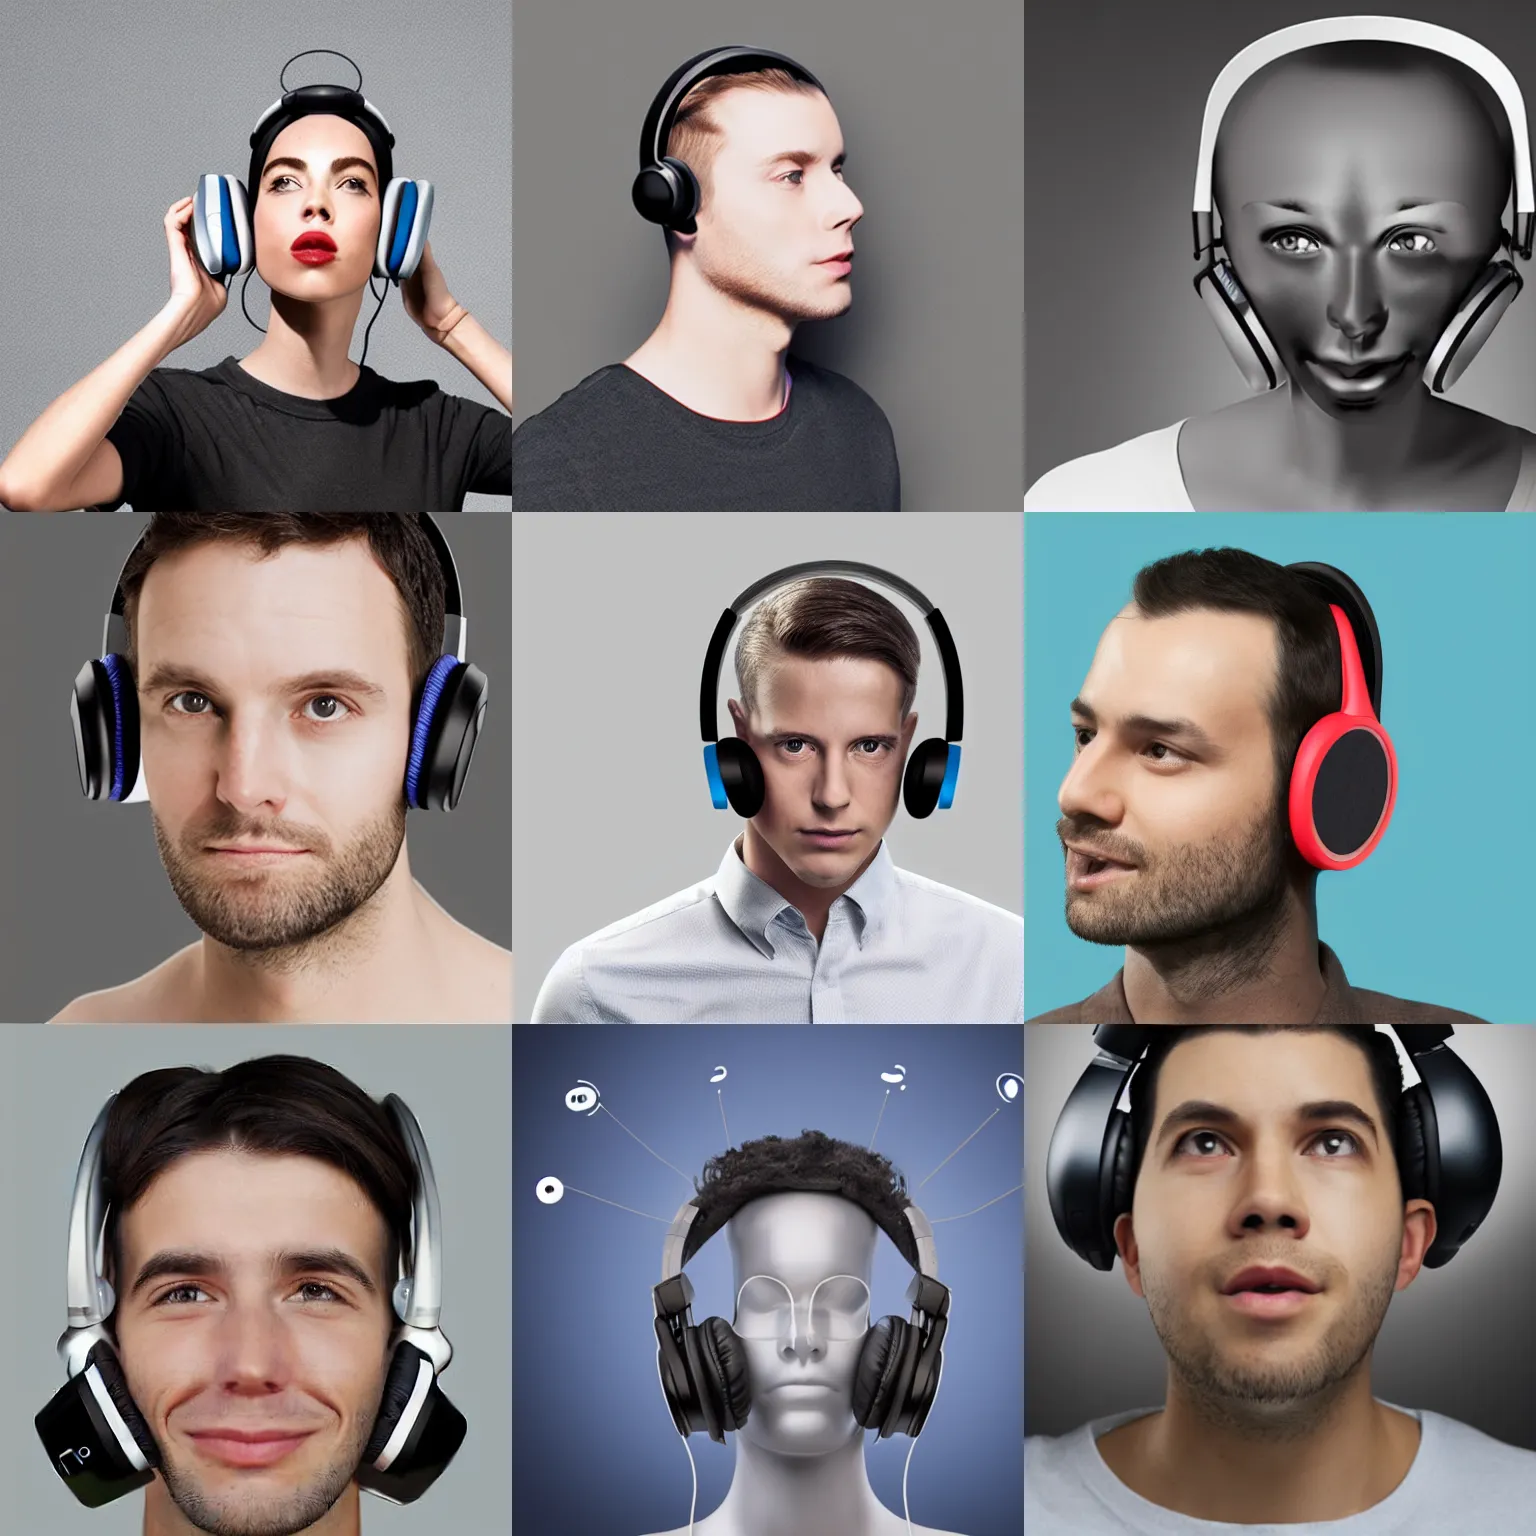 Prompt: promotional product concept photo of the tripodhones, a person with 3 ears wearing a 3 - eared headphone concept, headphones designed for people with 3 ears